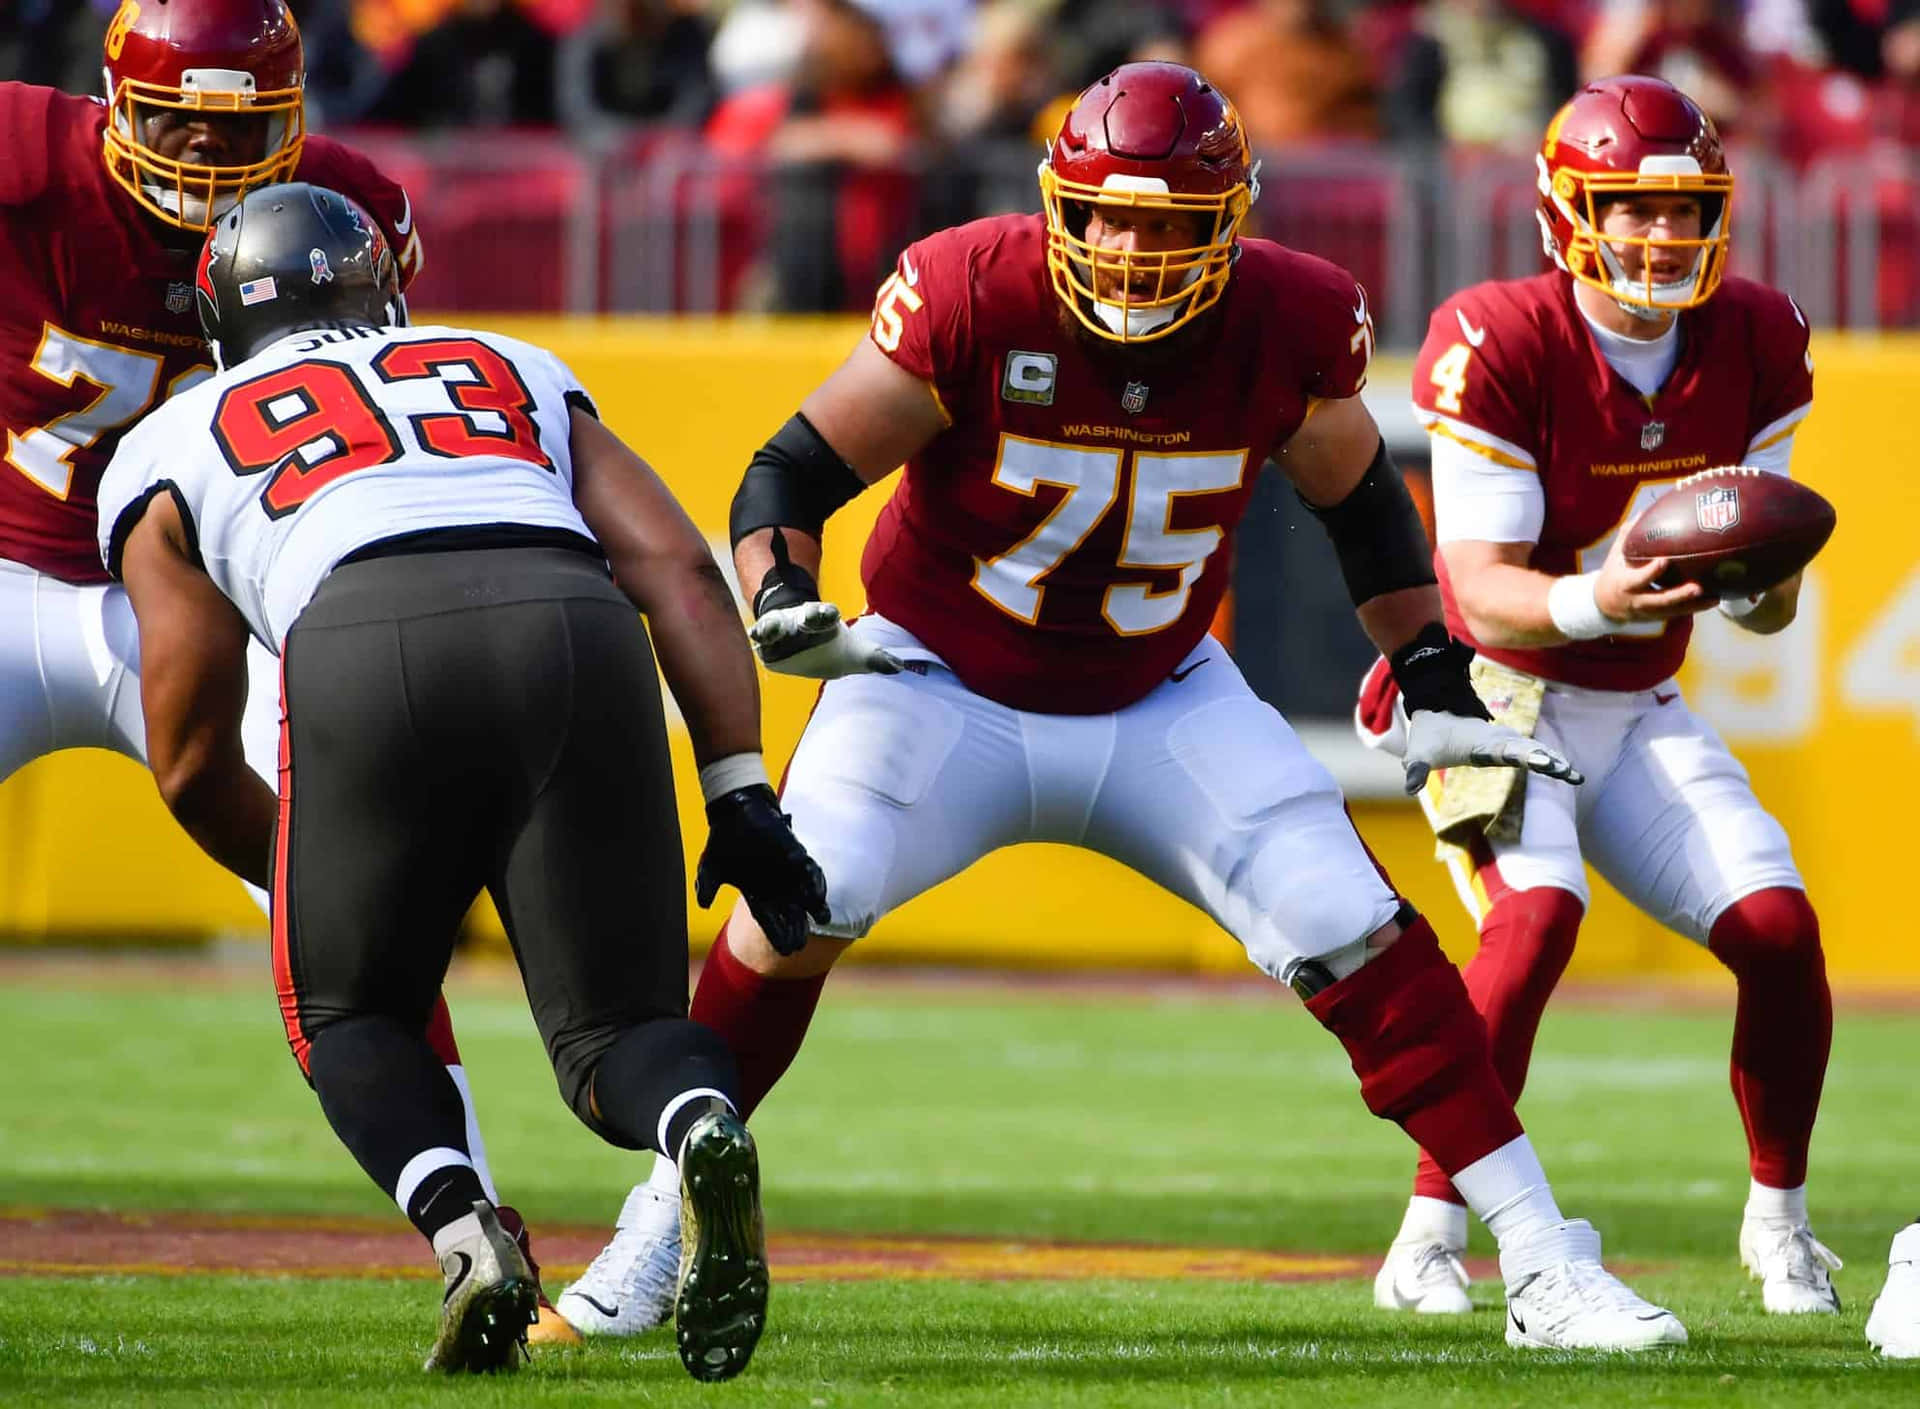 Brandonscherff Mot Seattle Seahawks 2020. (note: This Is Already In Correct Swedish. It Means 